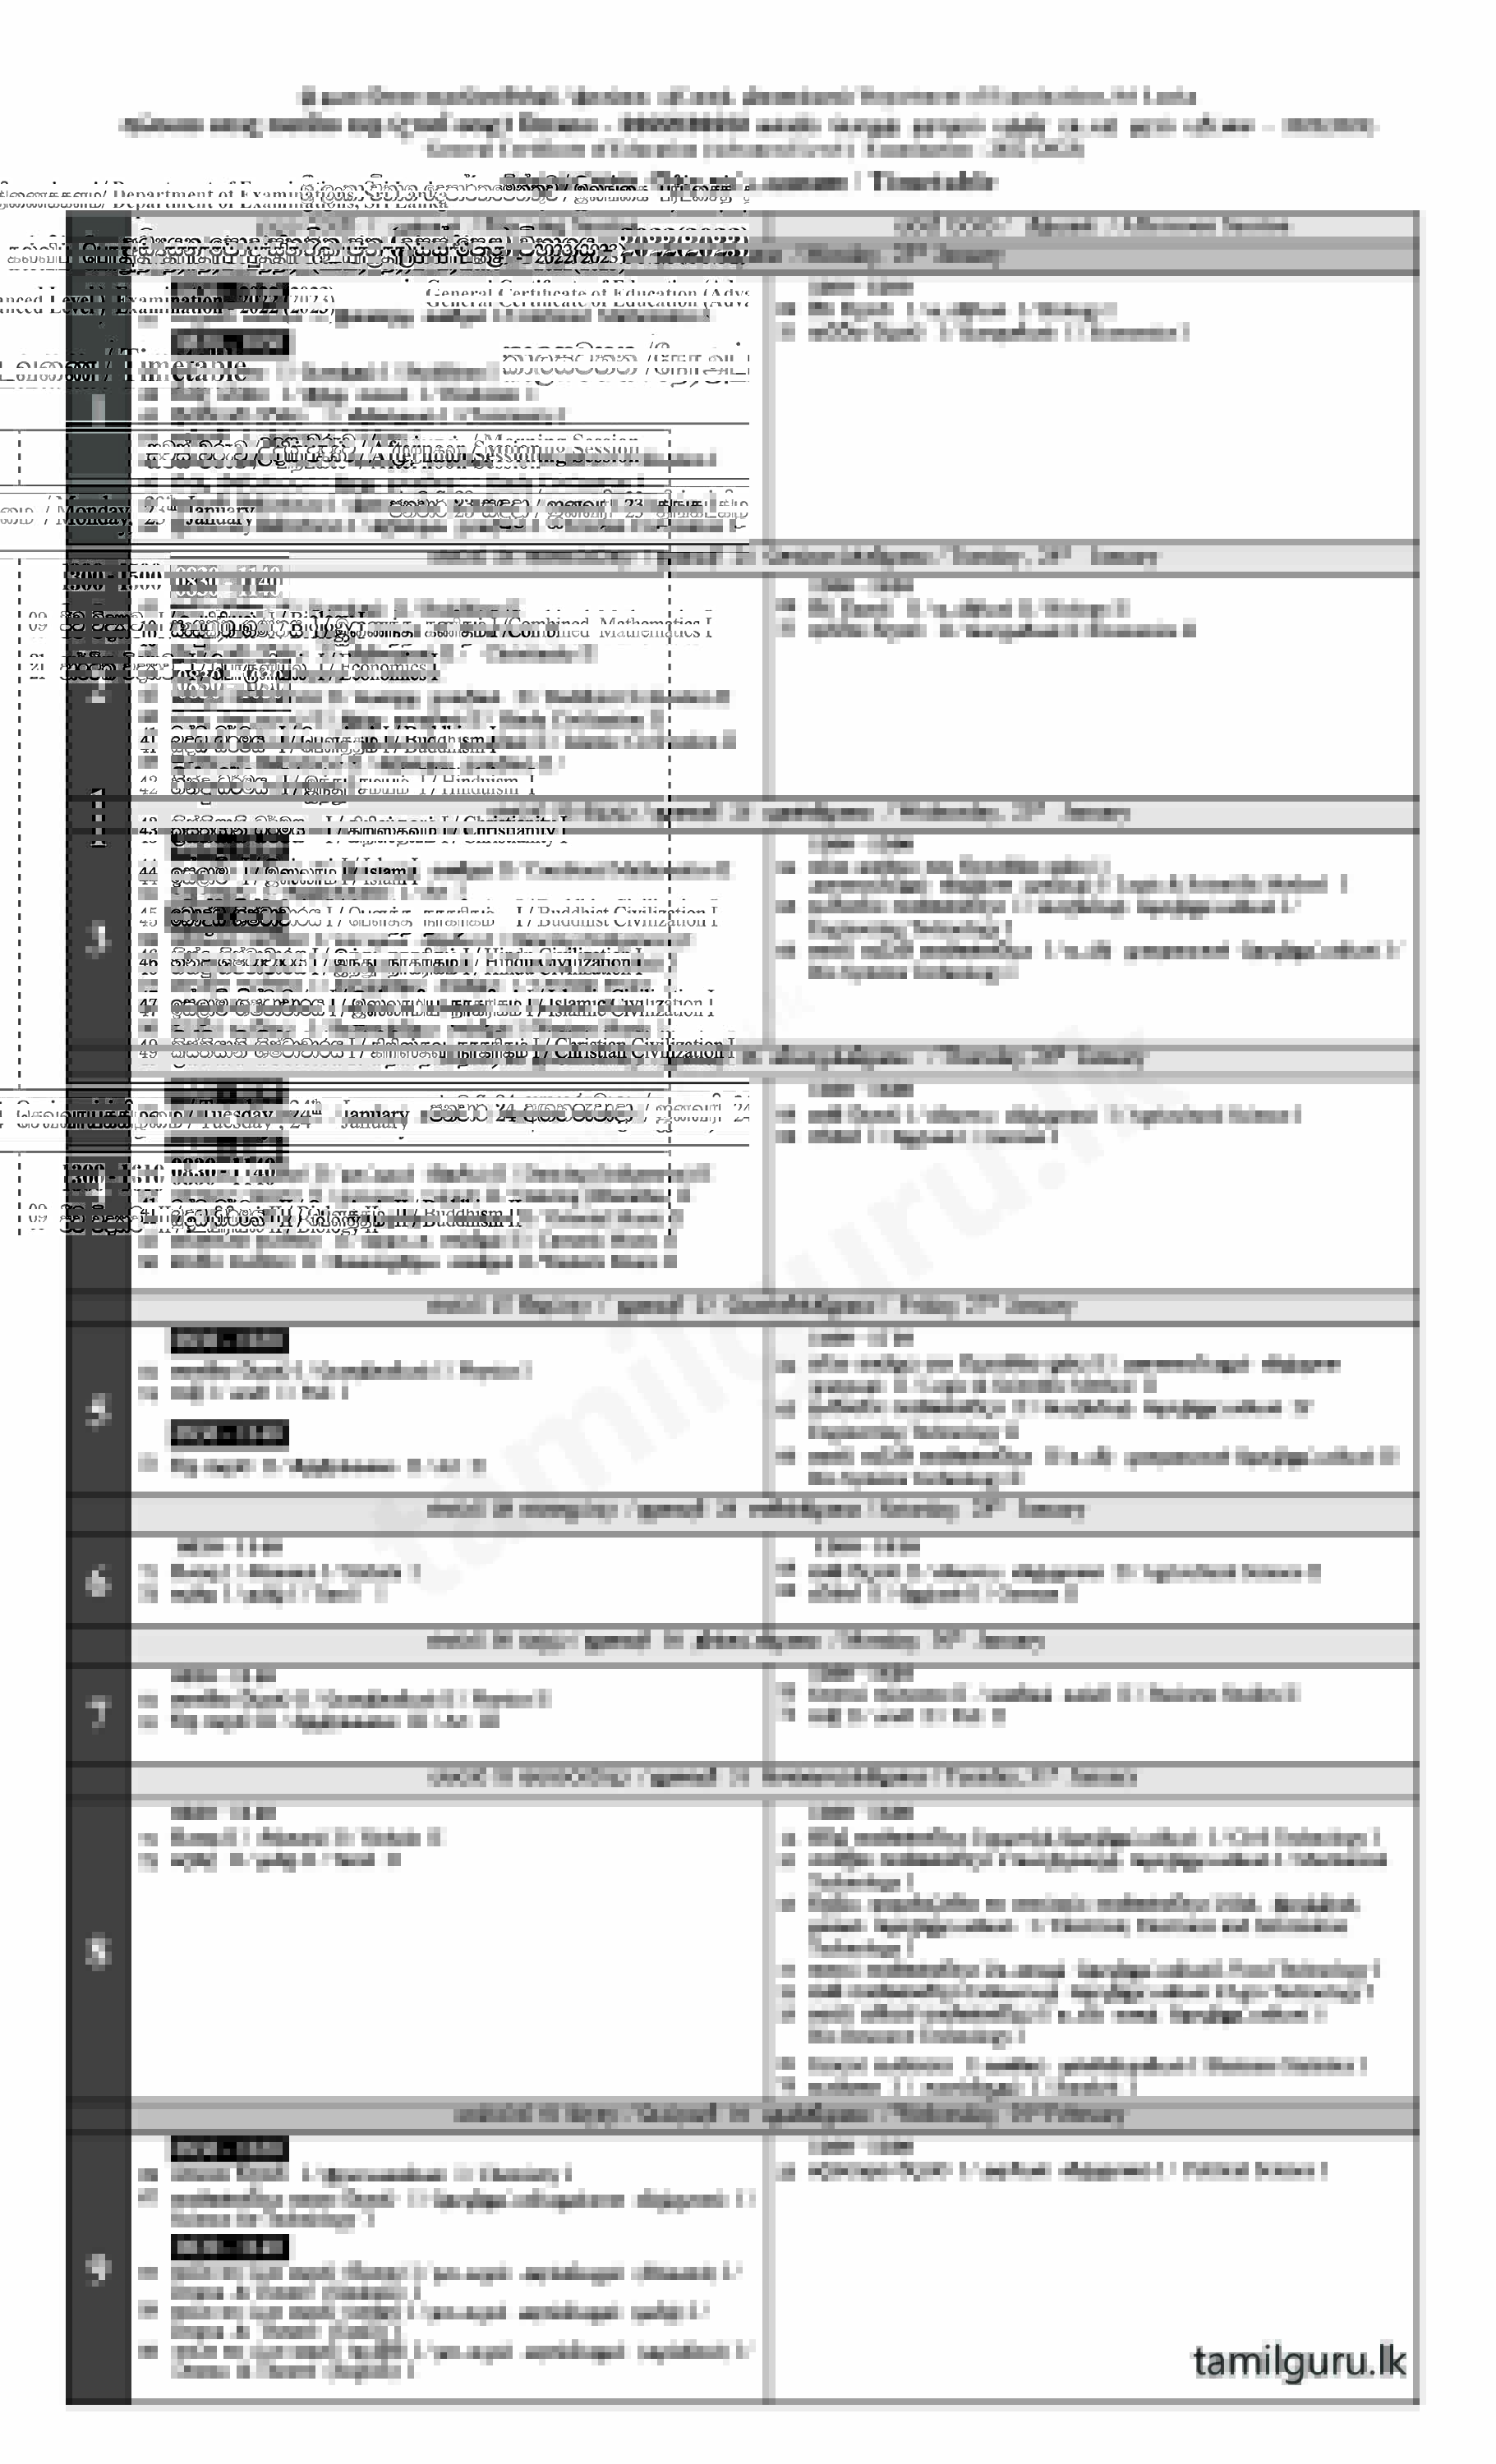 G.C.E. Advanced Level (A/L) Examination Time Table 2022 (2023) - Department of Examinations (Page 1)